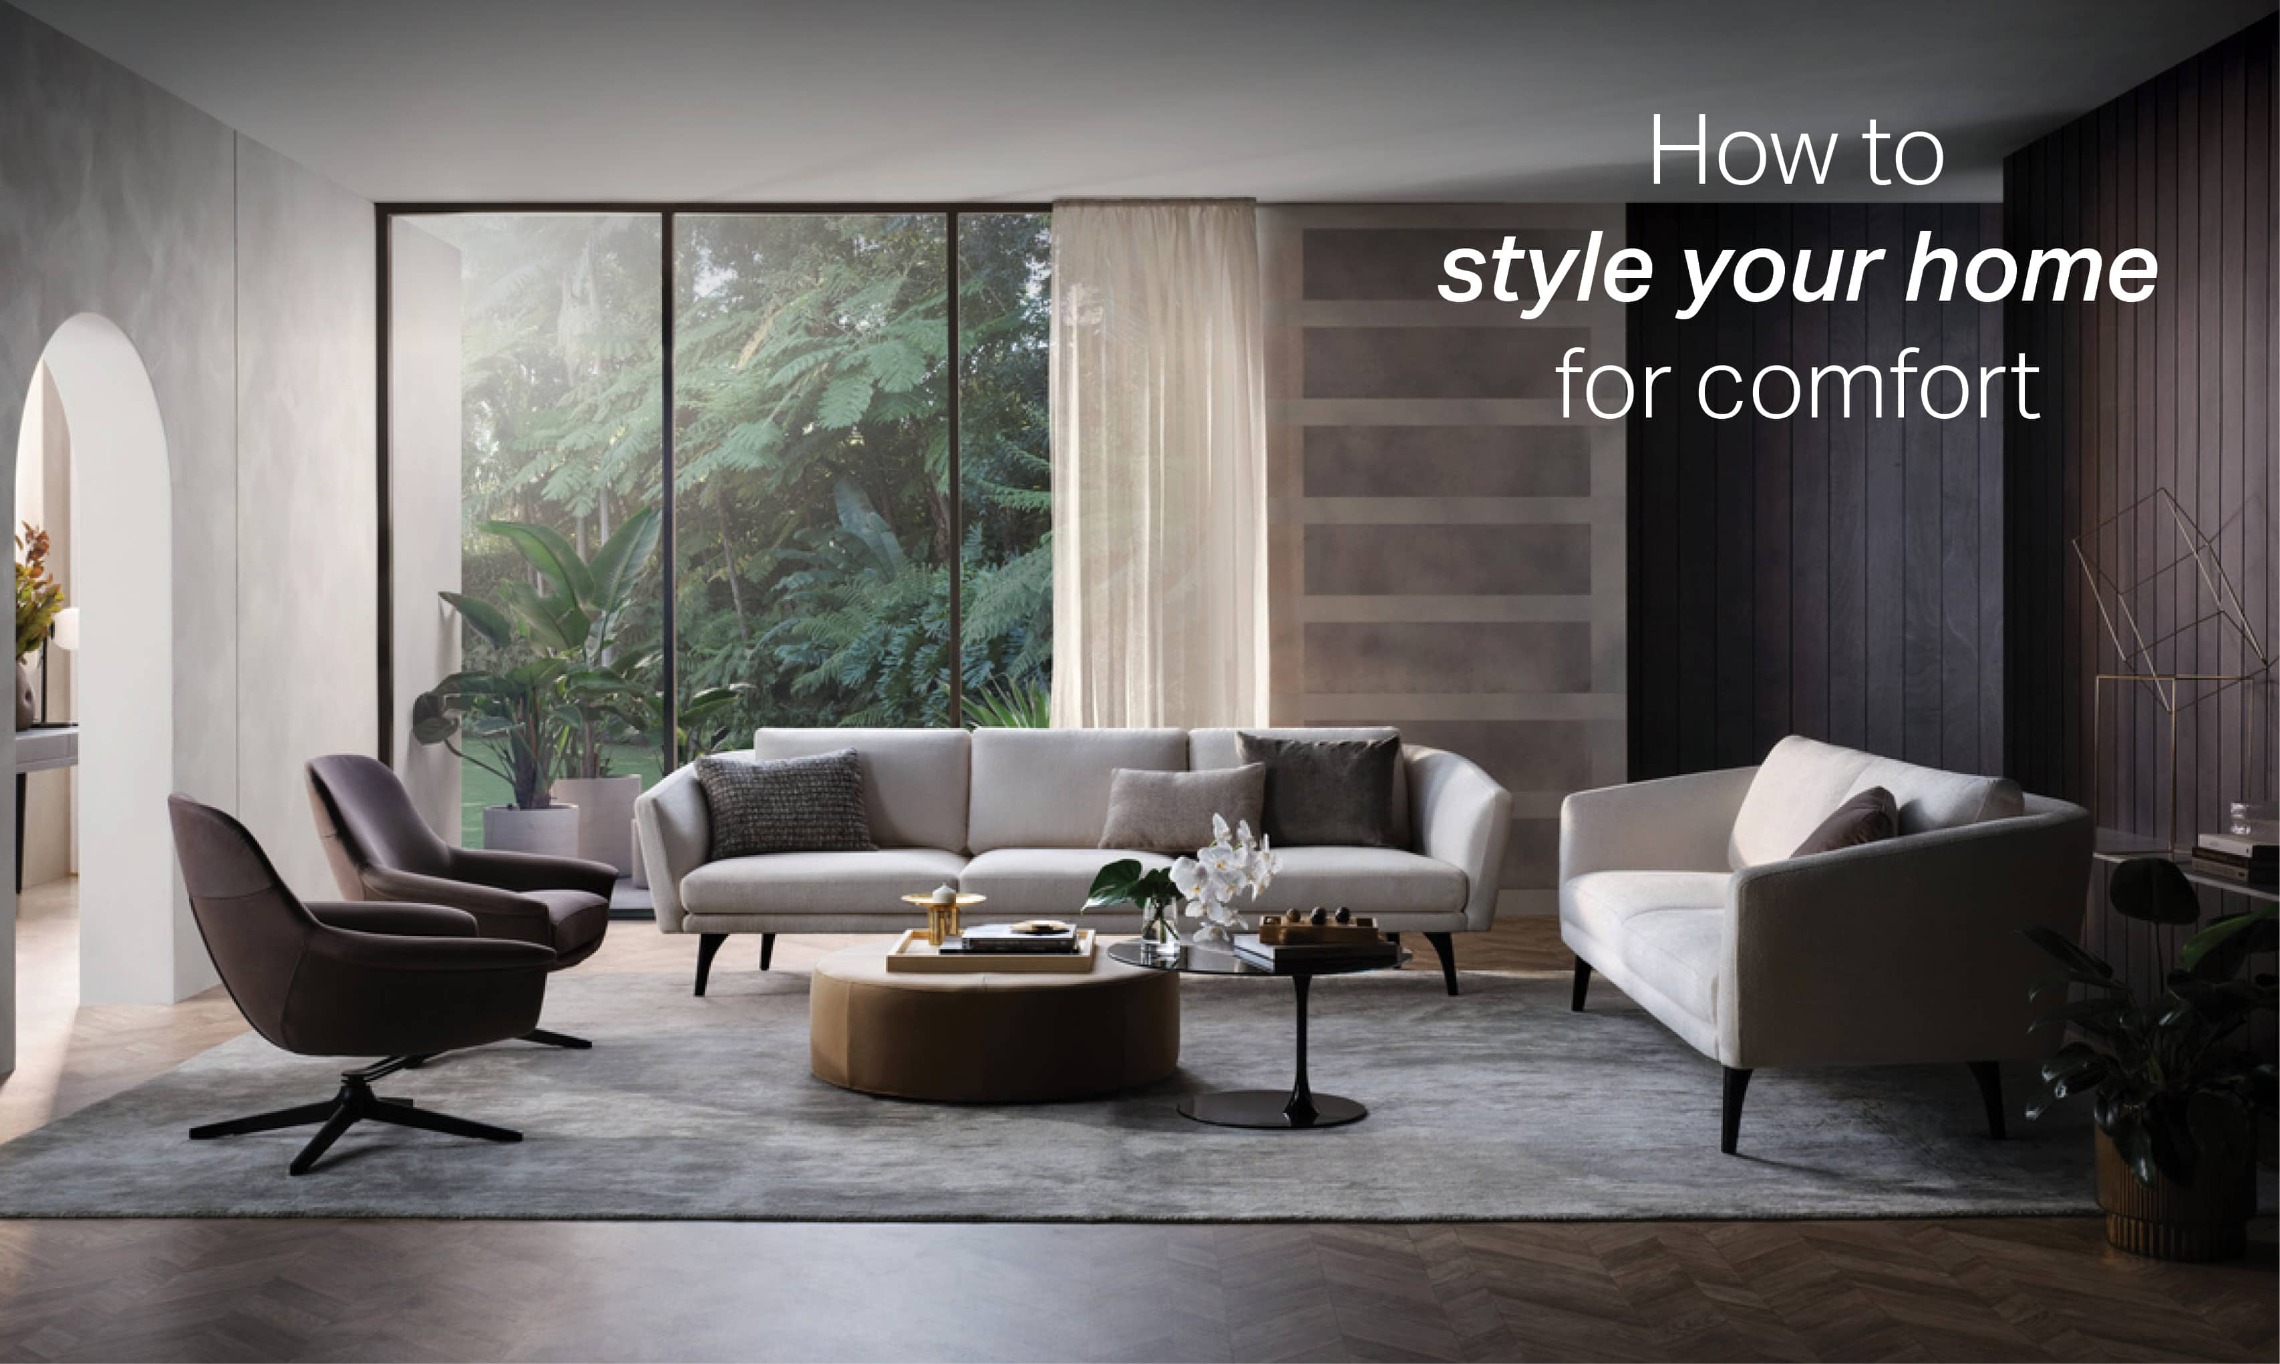 How to style your home for comfort